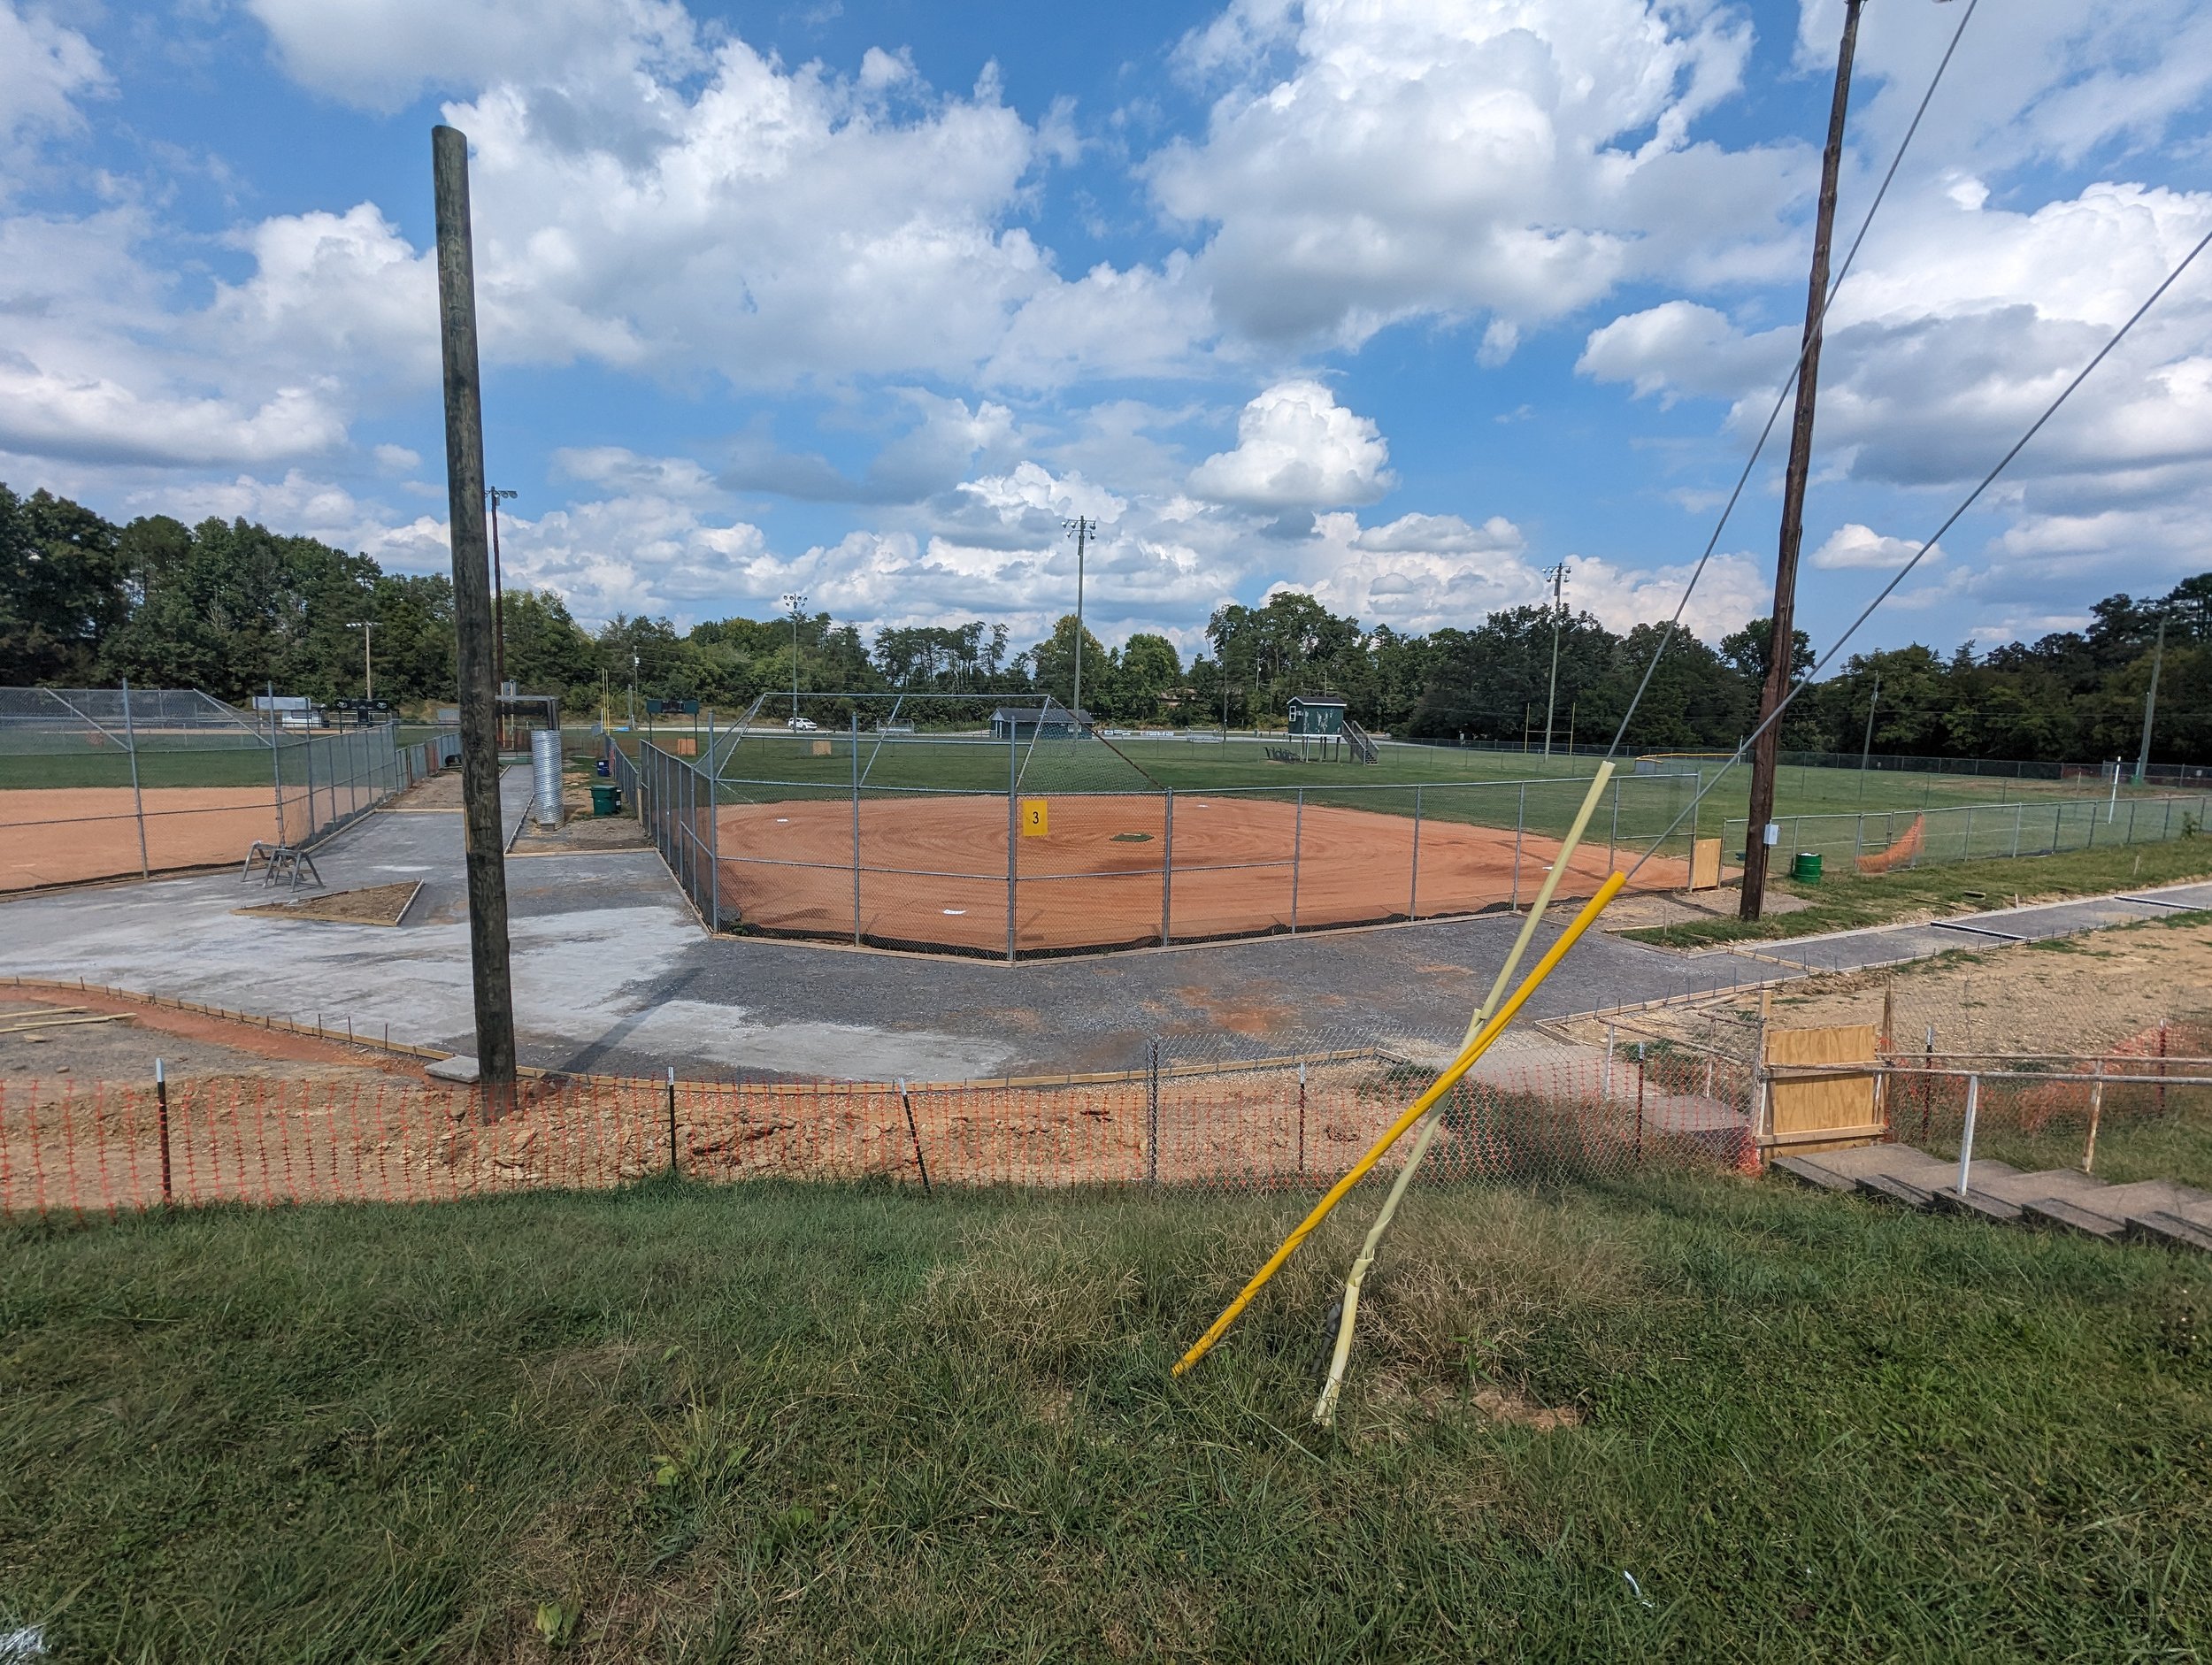 9/15/23 - Grading, base stone, and formwork for sidewalks and seating areas is complete at fields 2-4.